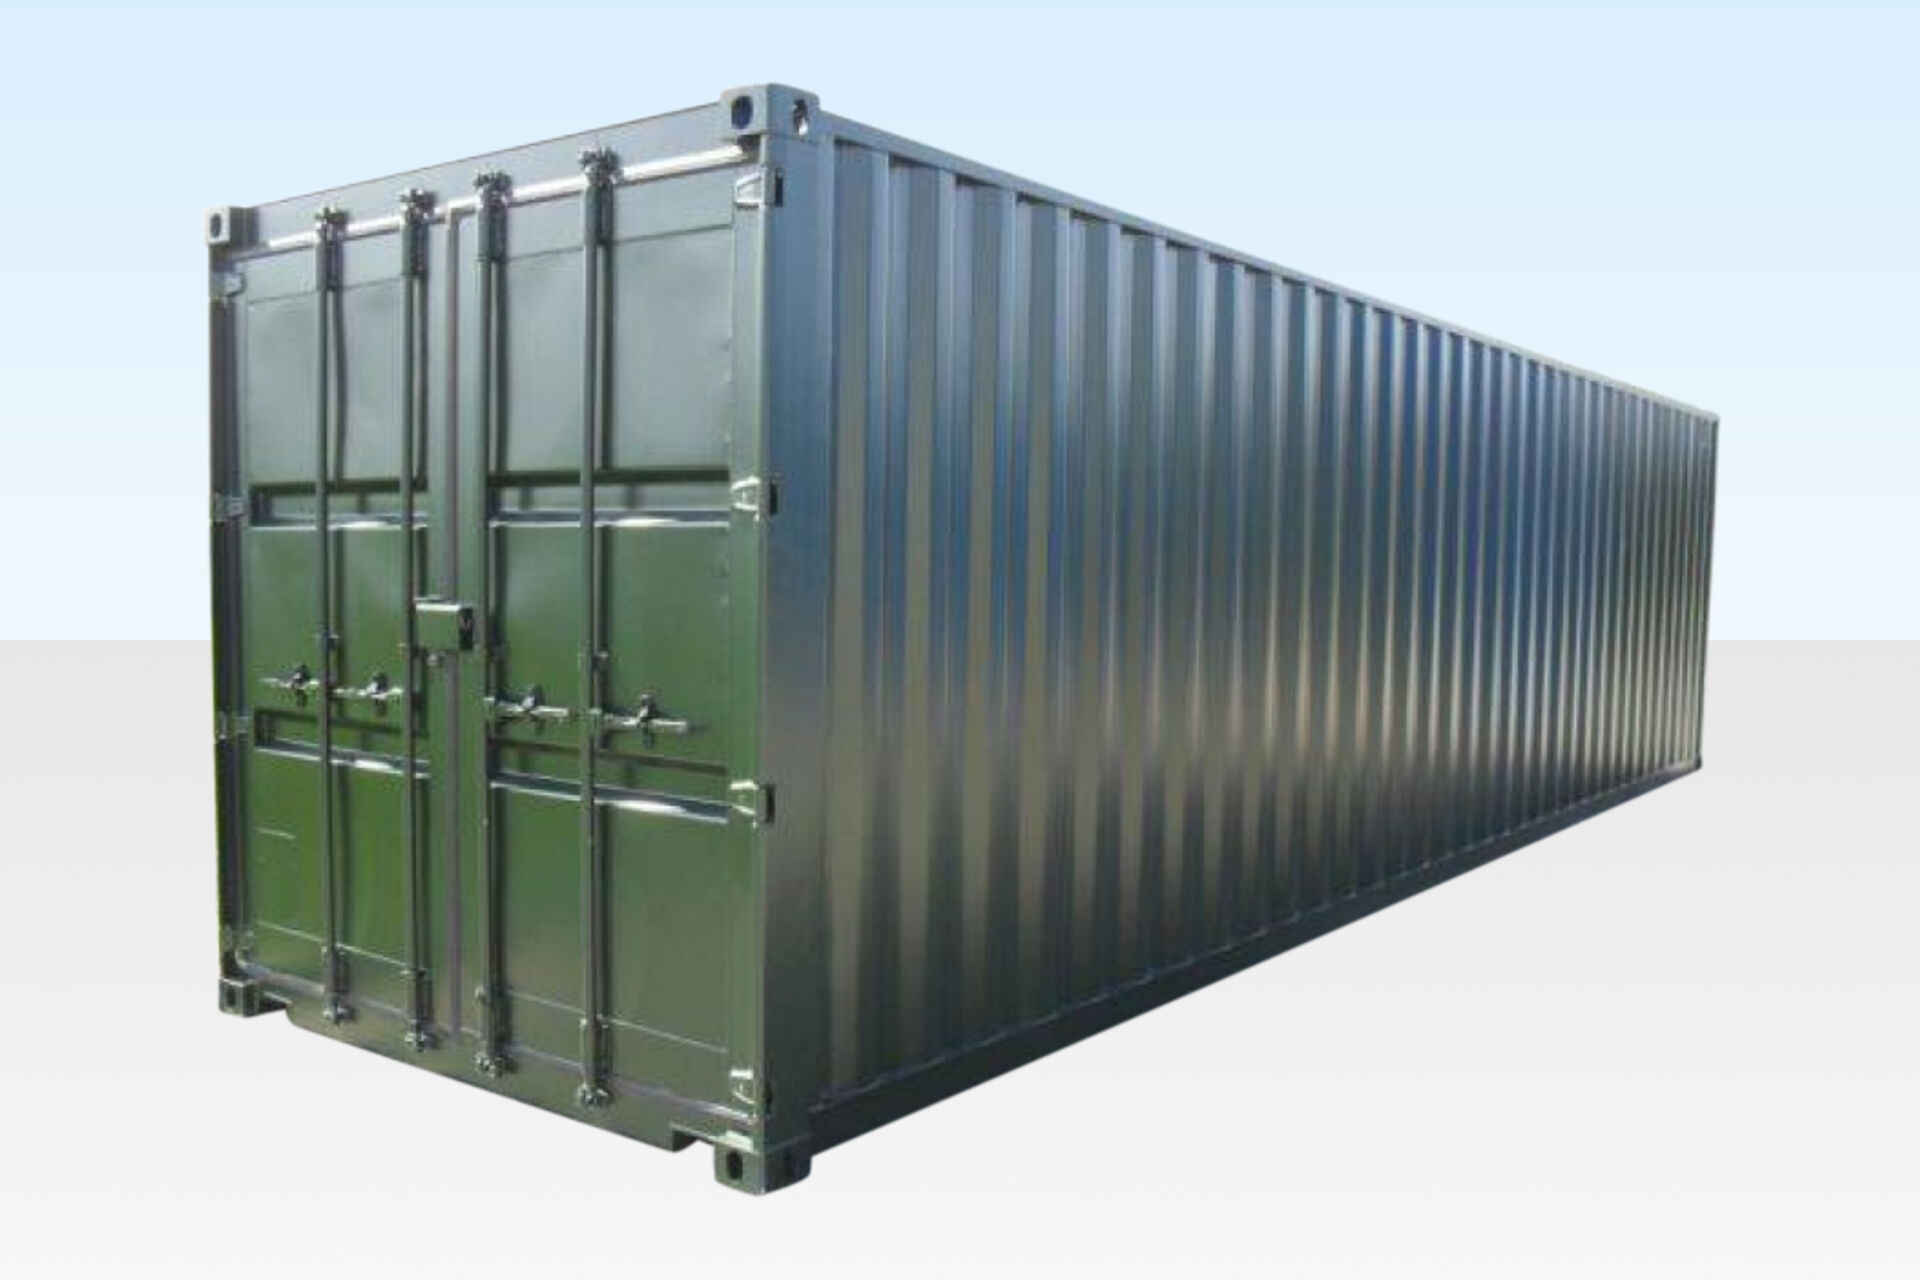 BUY 30FT X 8FT SHIPPING CONTAINER (ONE TRIP) – CUT DOWN AT WWW.HELLOCONTAINERS.COM